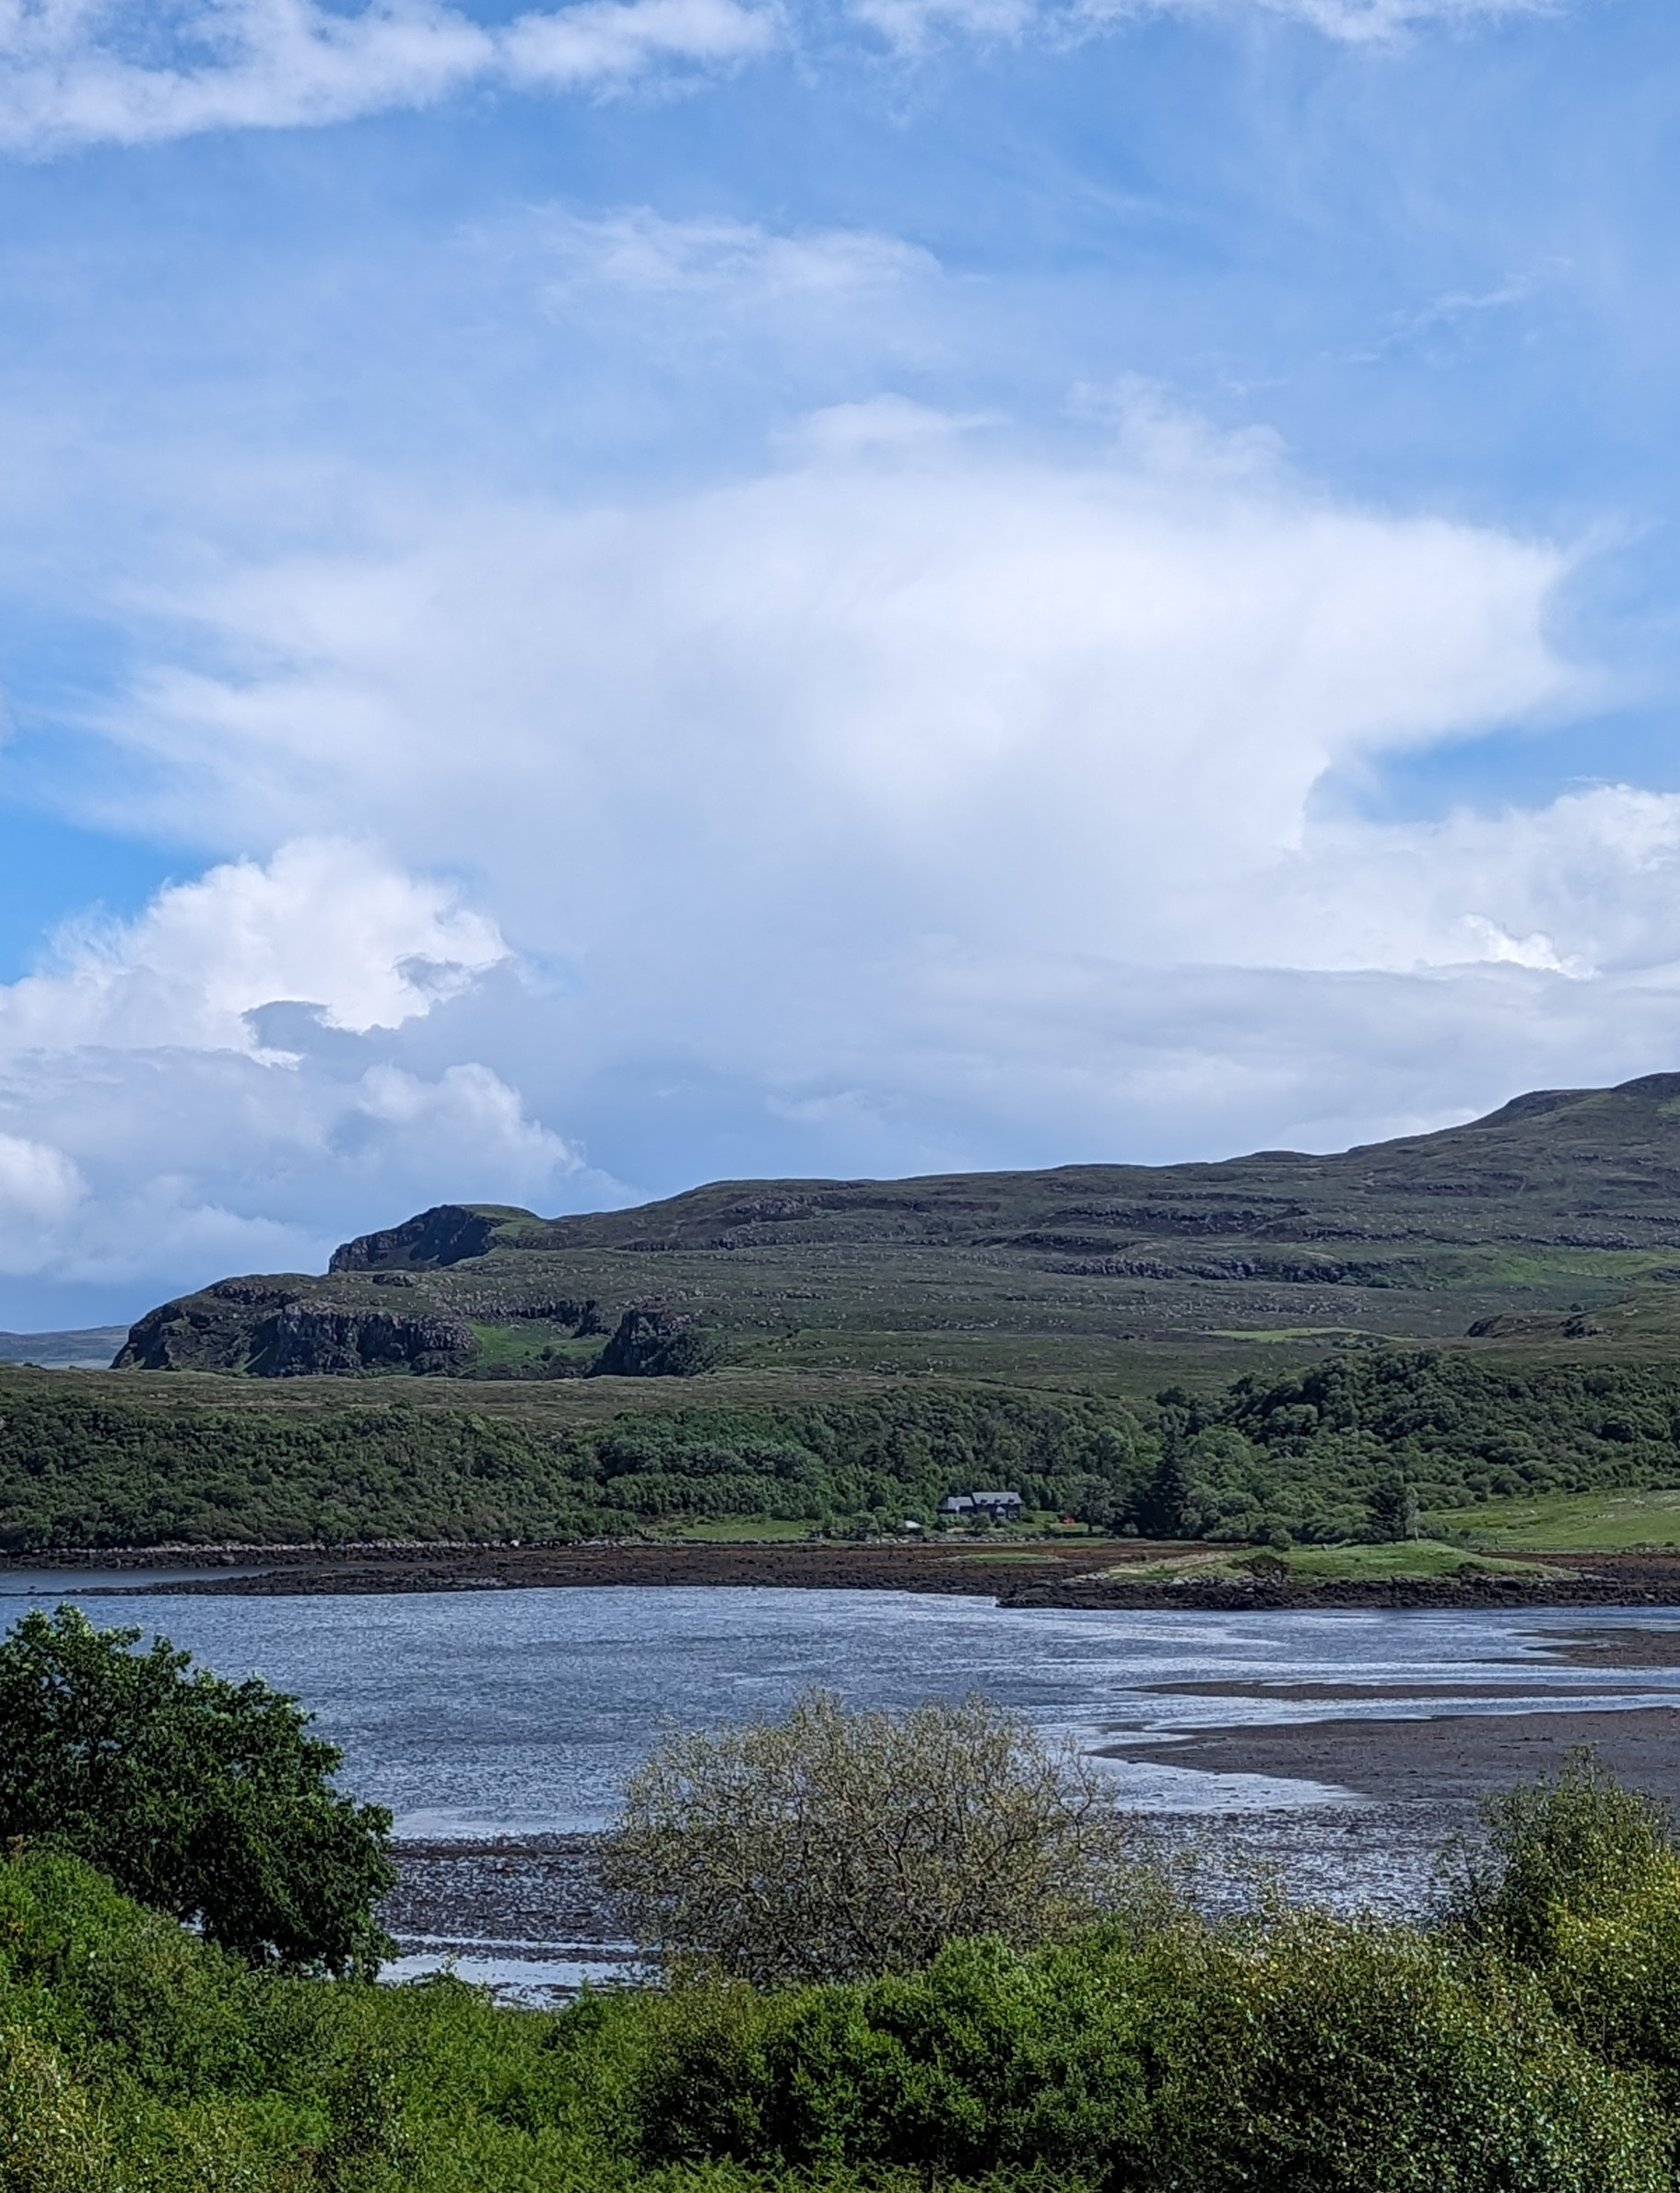 Heavy shower clouds, looking east from Portree on Skye.